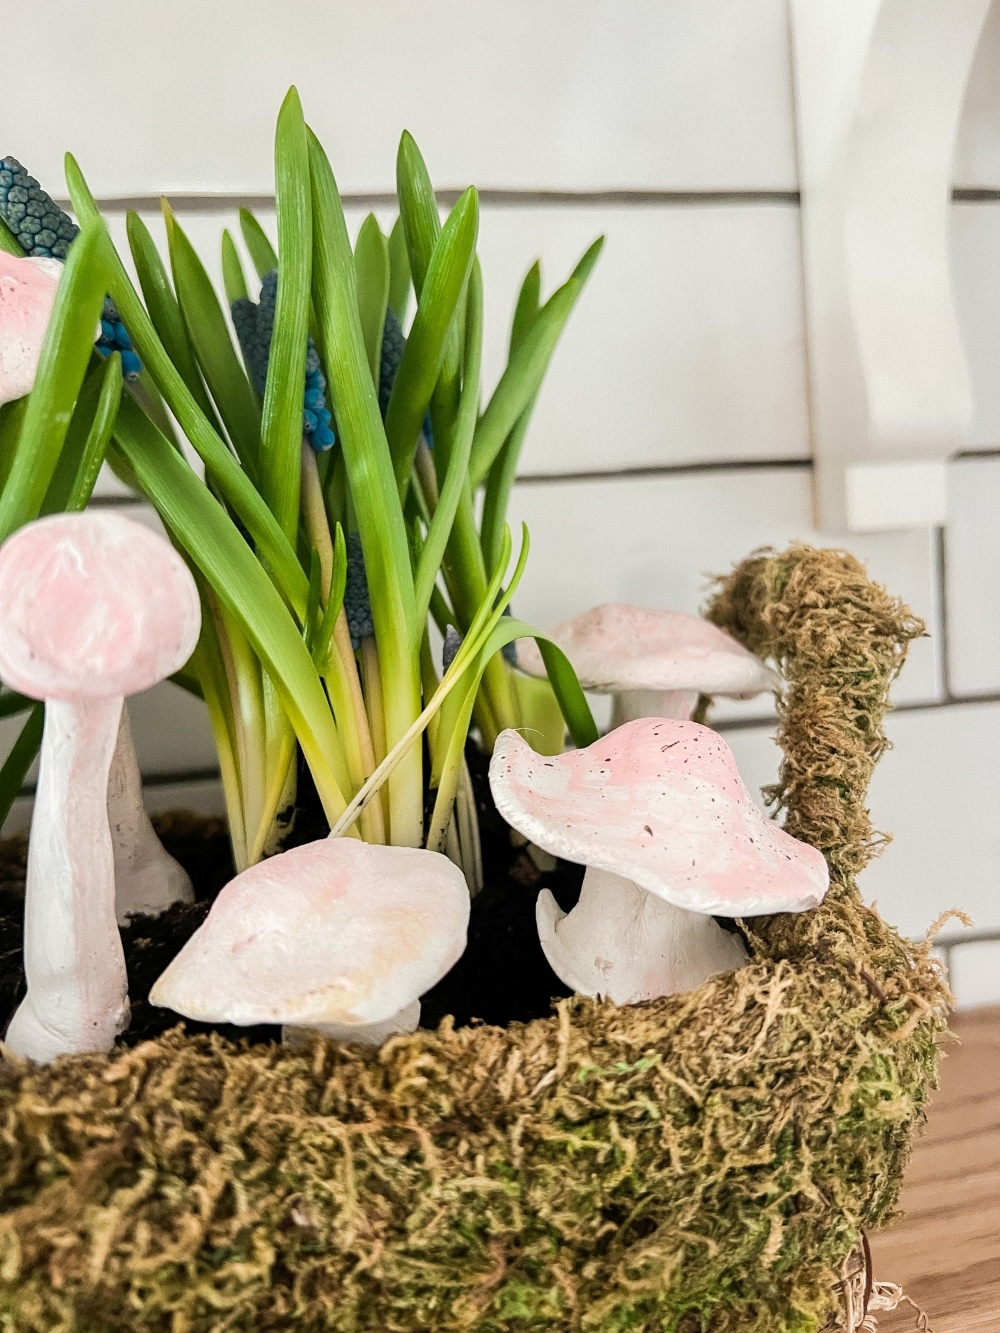 Anthropologie-Inspired Clay Mushroom Plant Stakes. Make these adorable clay mushroom stakes to add to planters and for Spring!